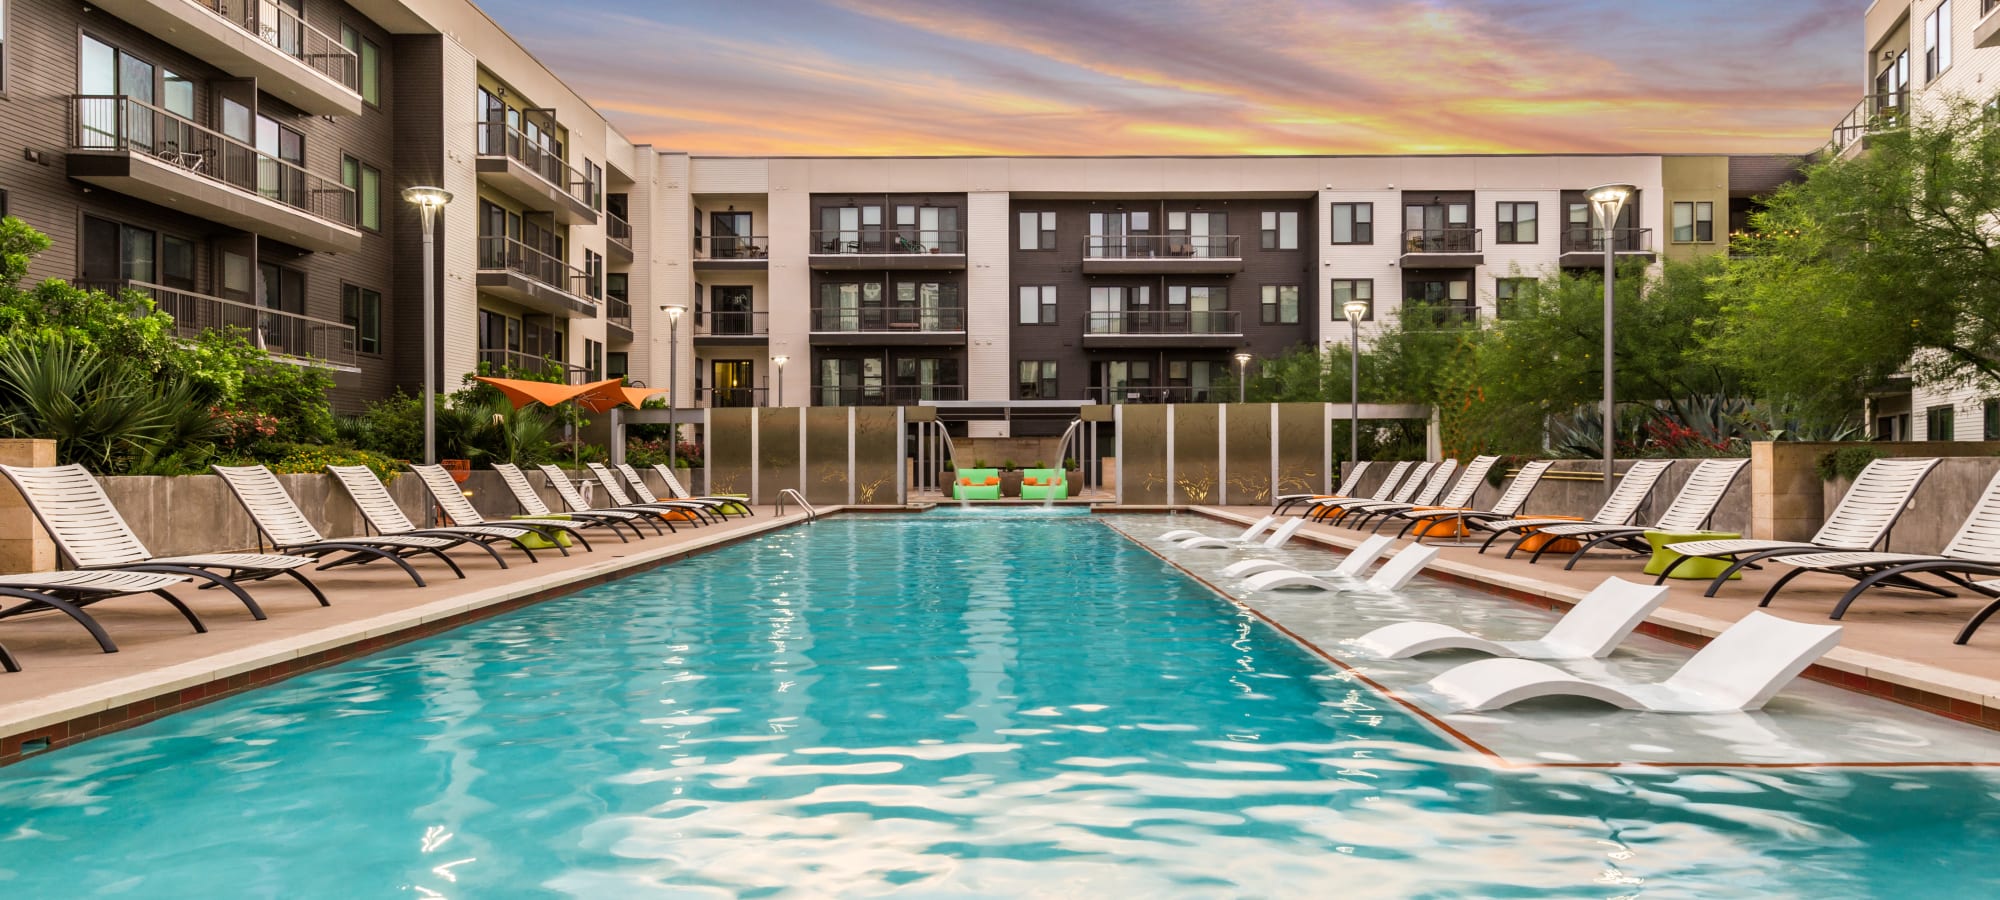 Apartments at Marq Uptown in Austin, Texas